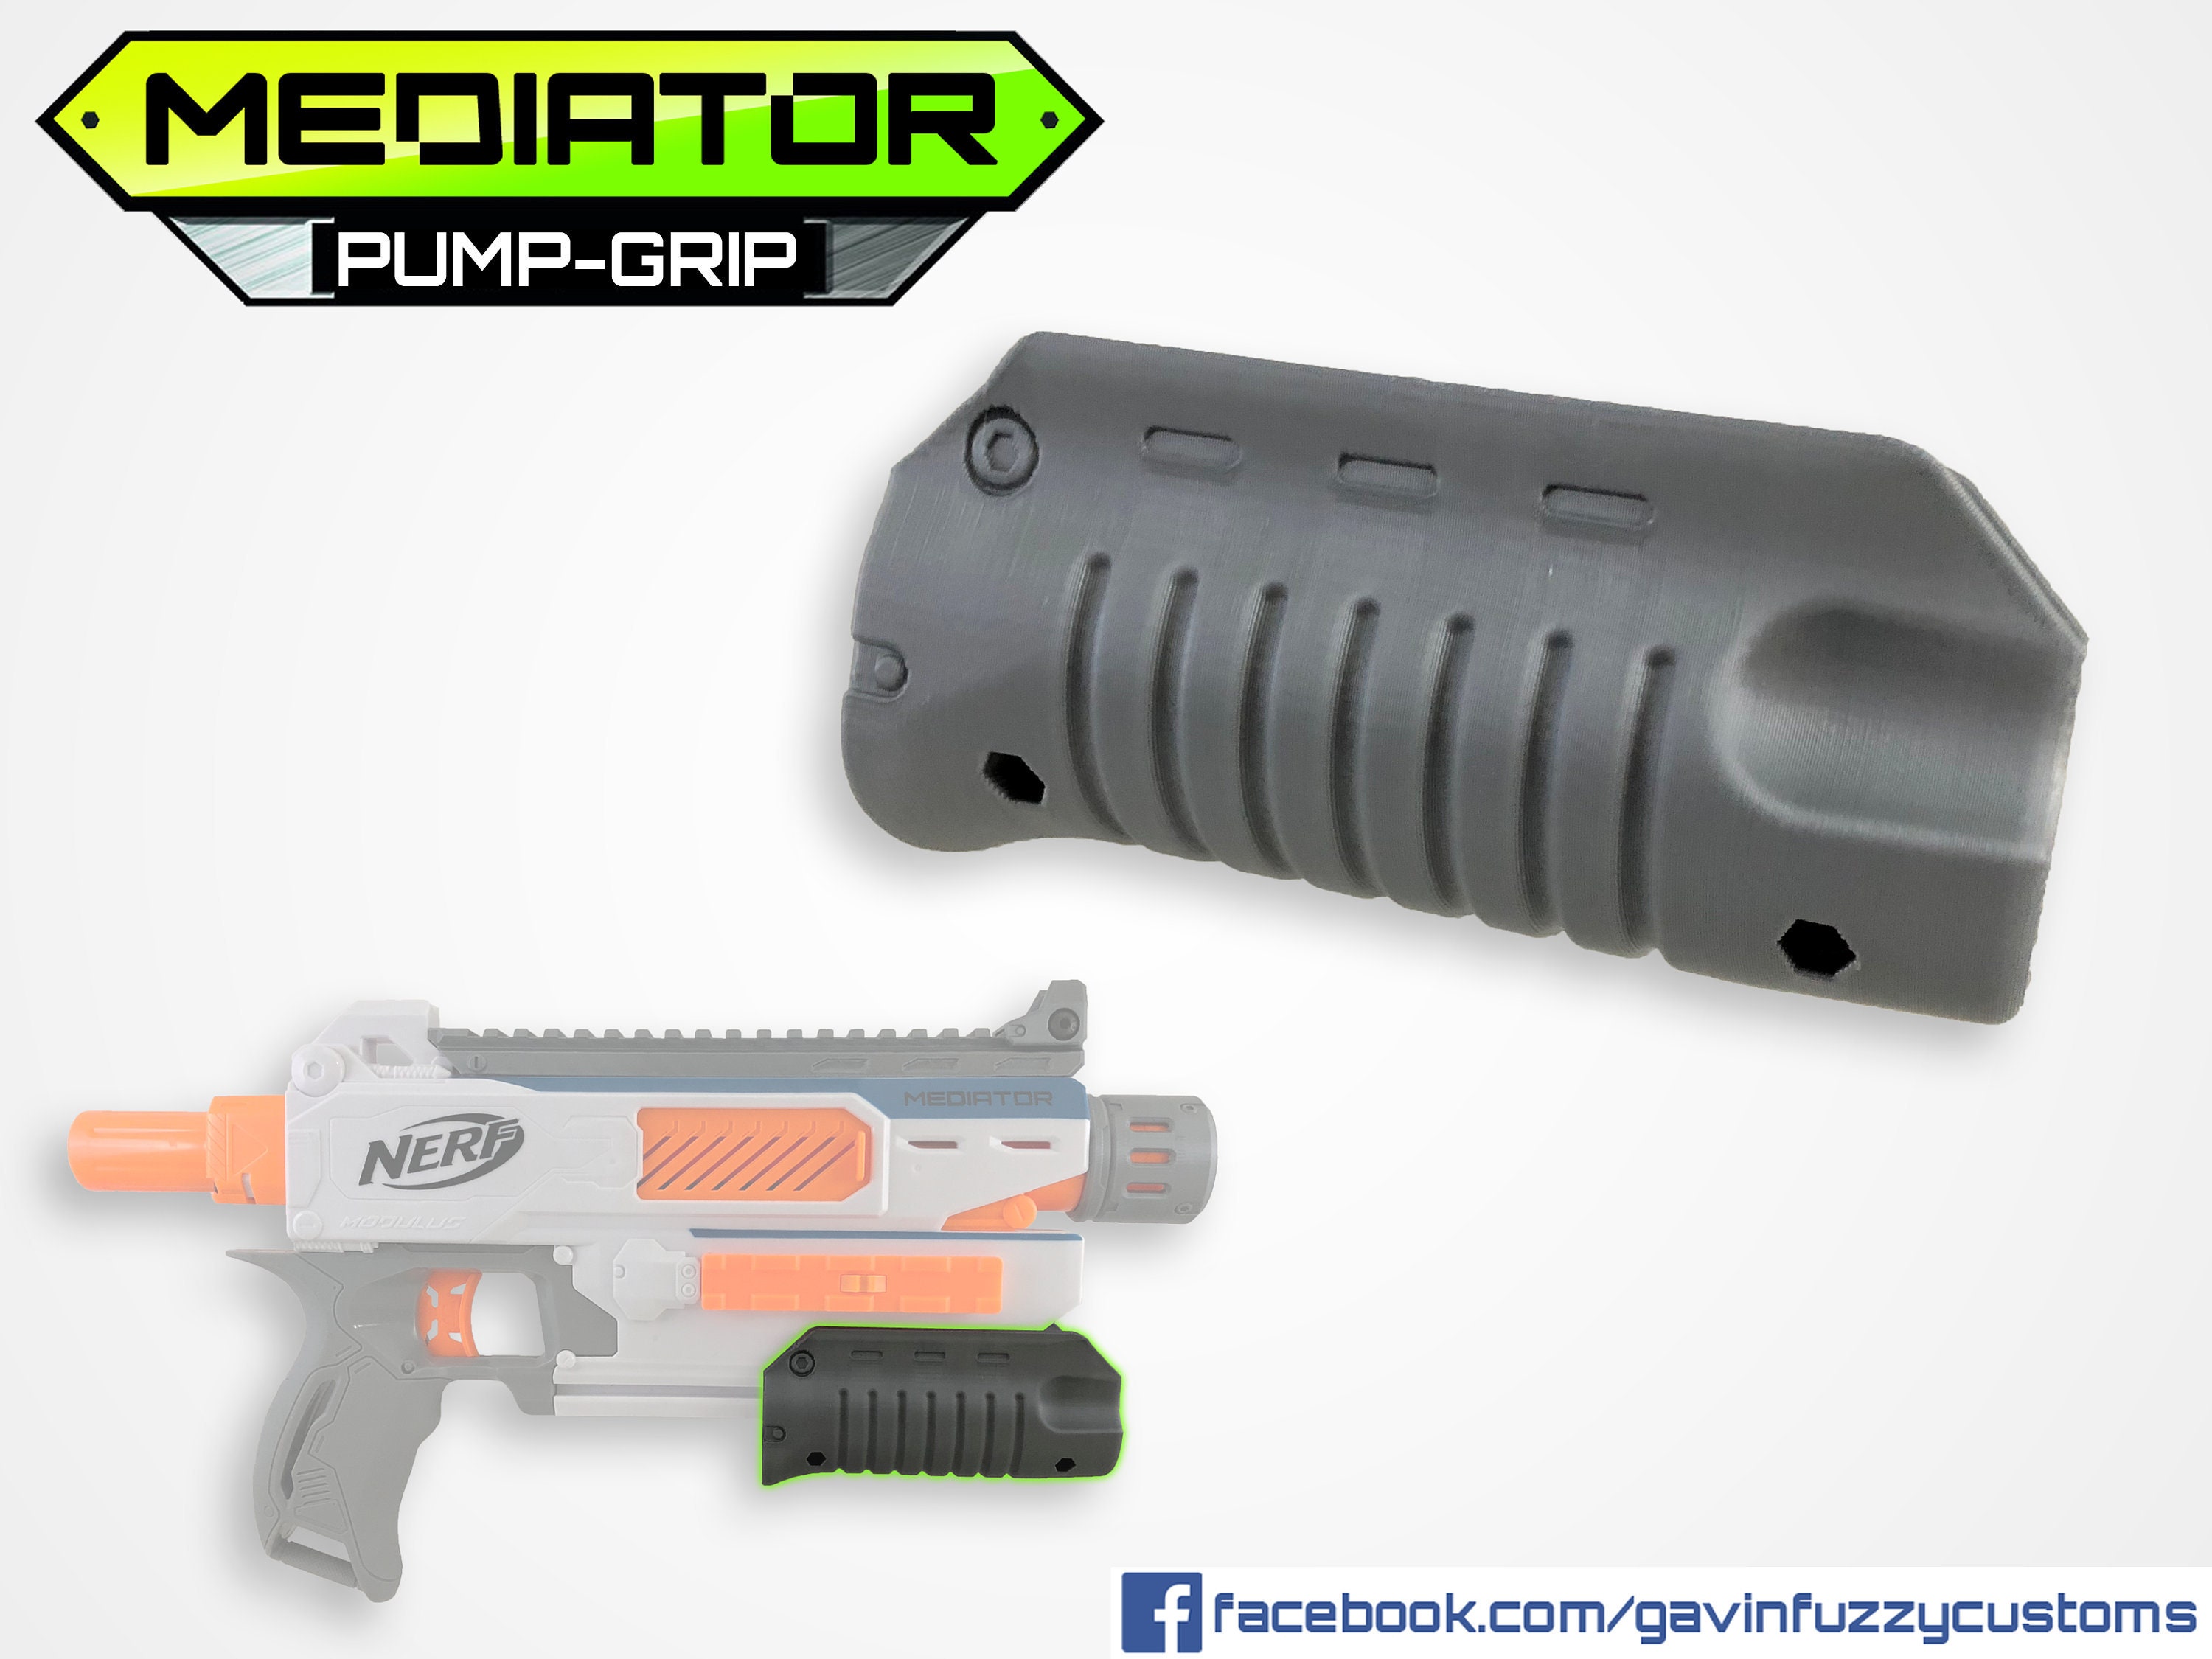 Nerf's Modulus Mediator includes 6 darts and is now available from